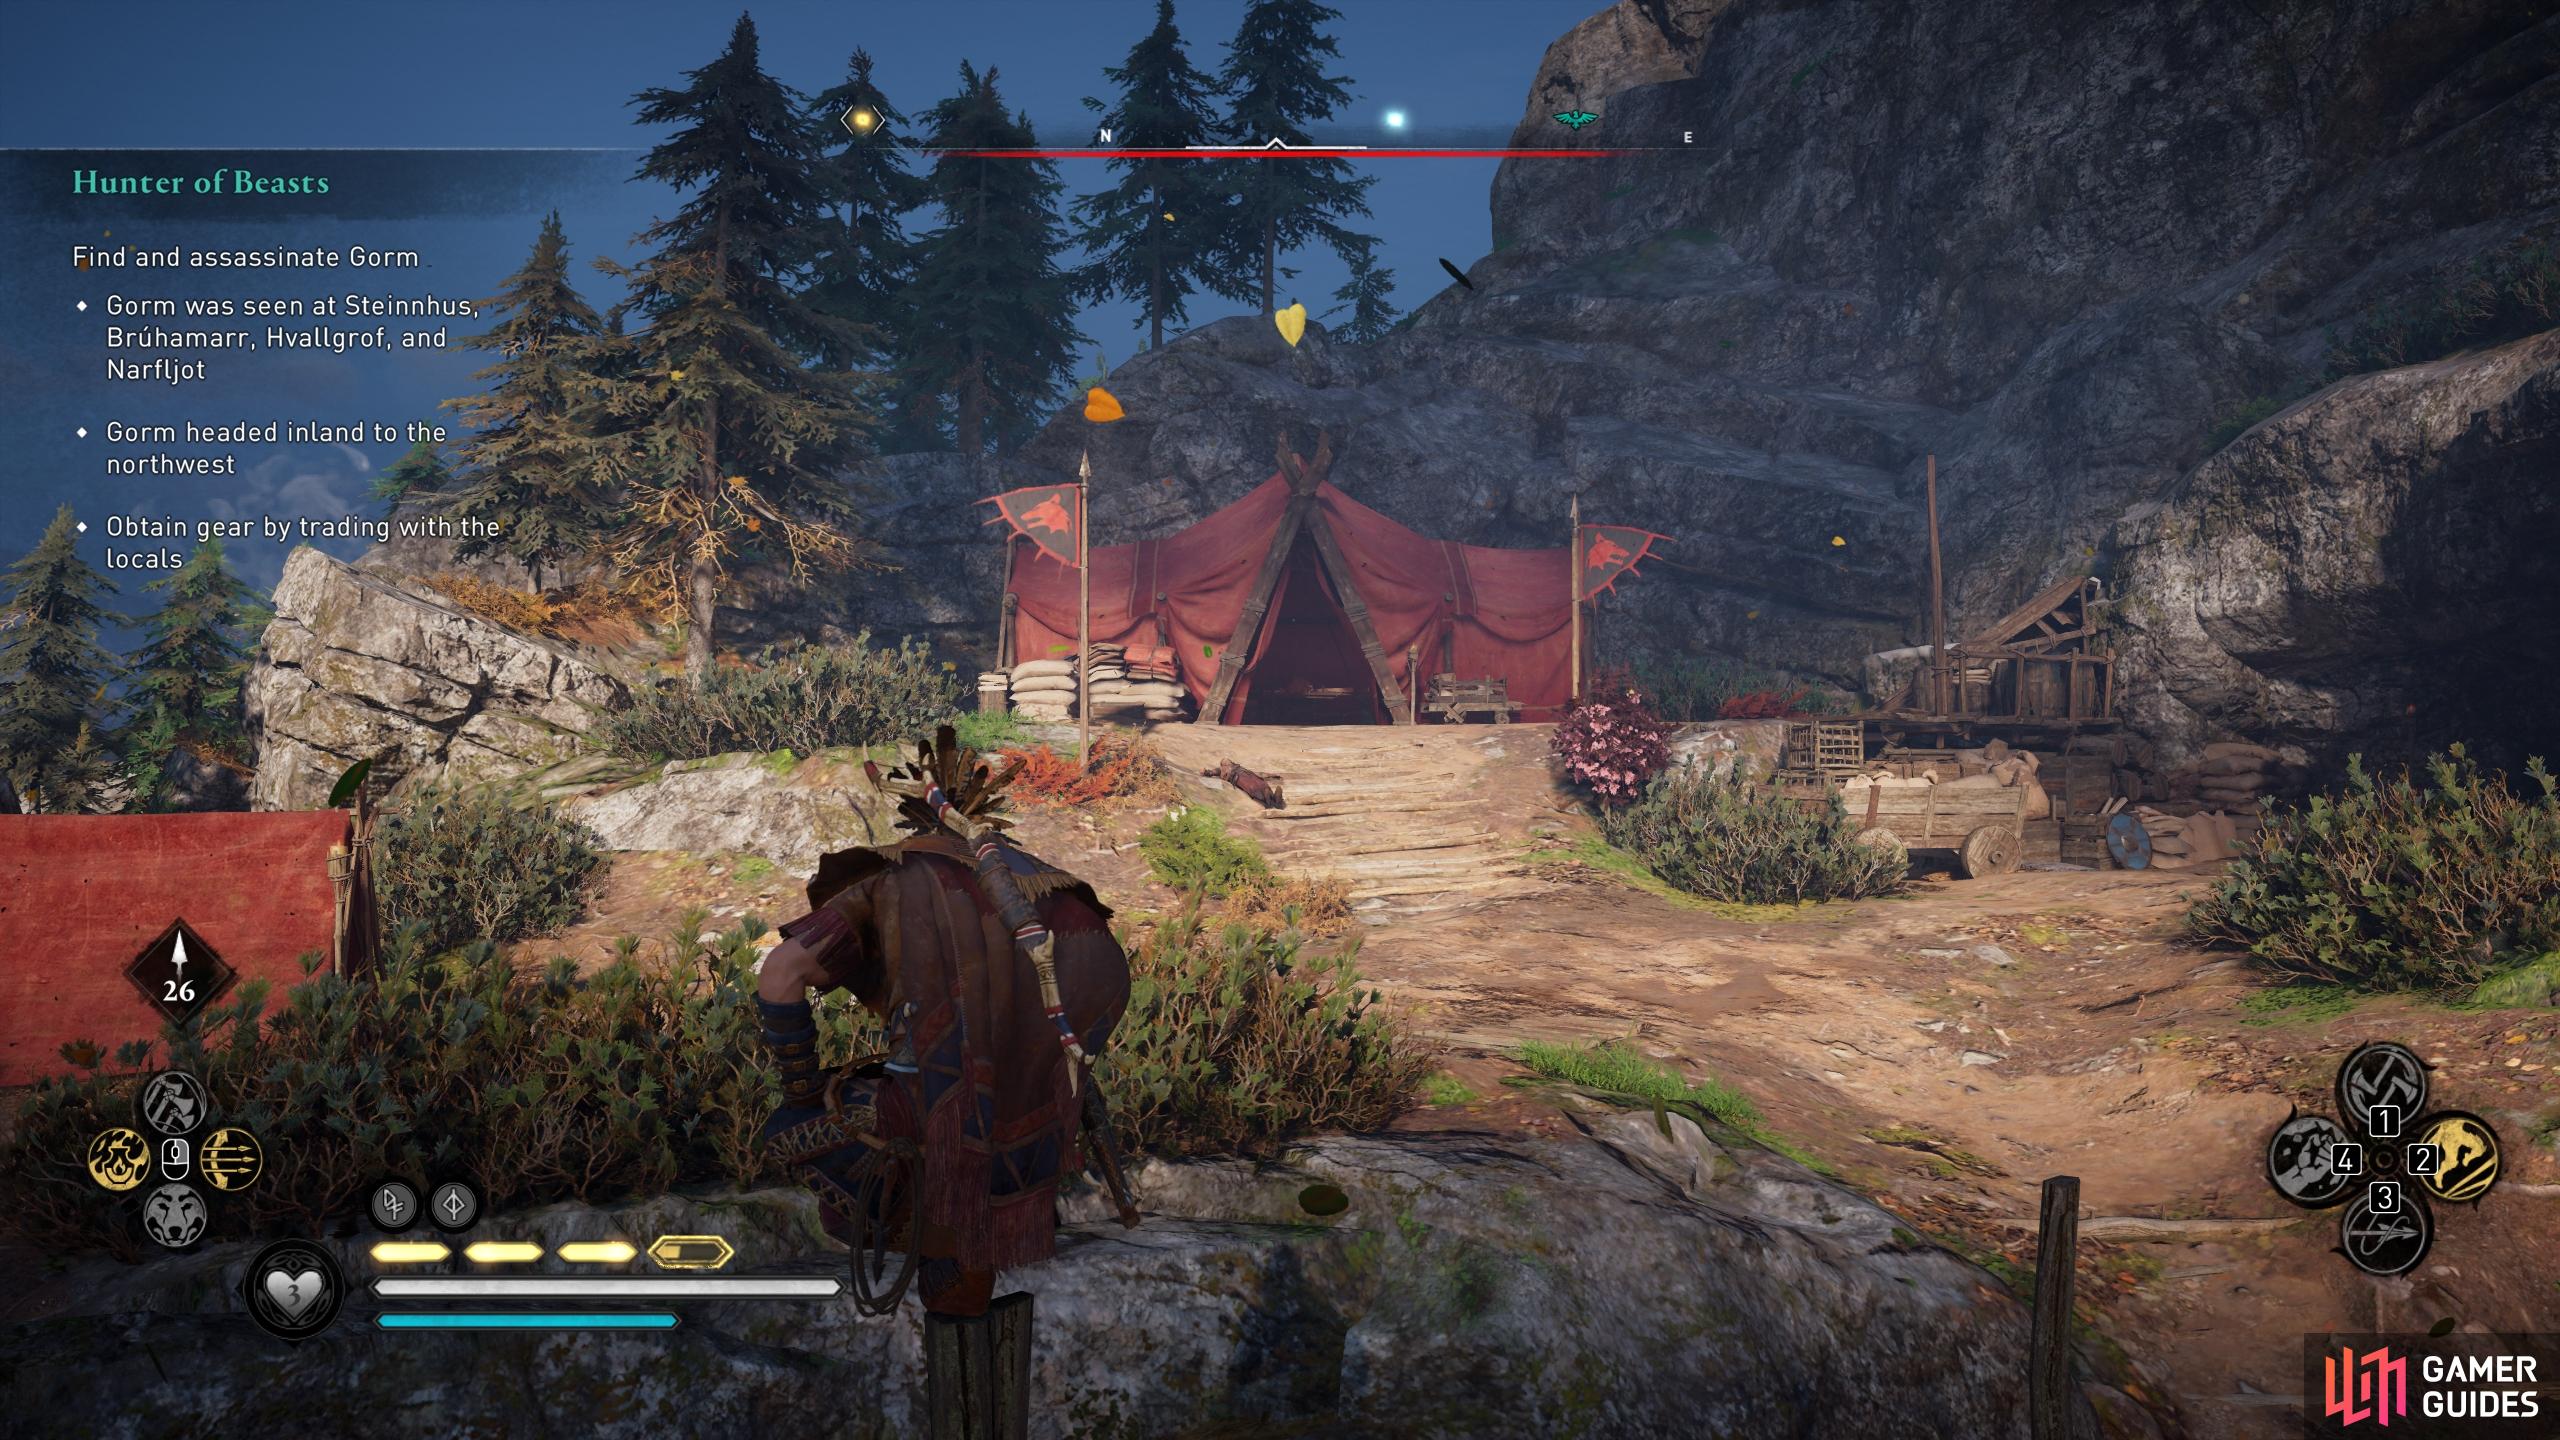 You'll find the wealth chest in the tent in the north of the camp.